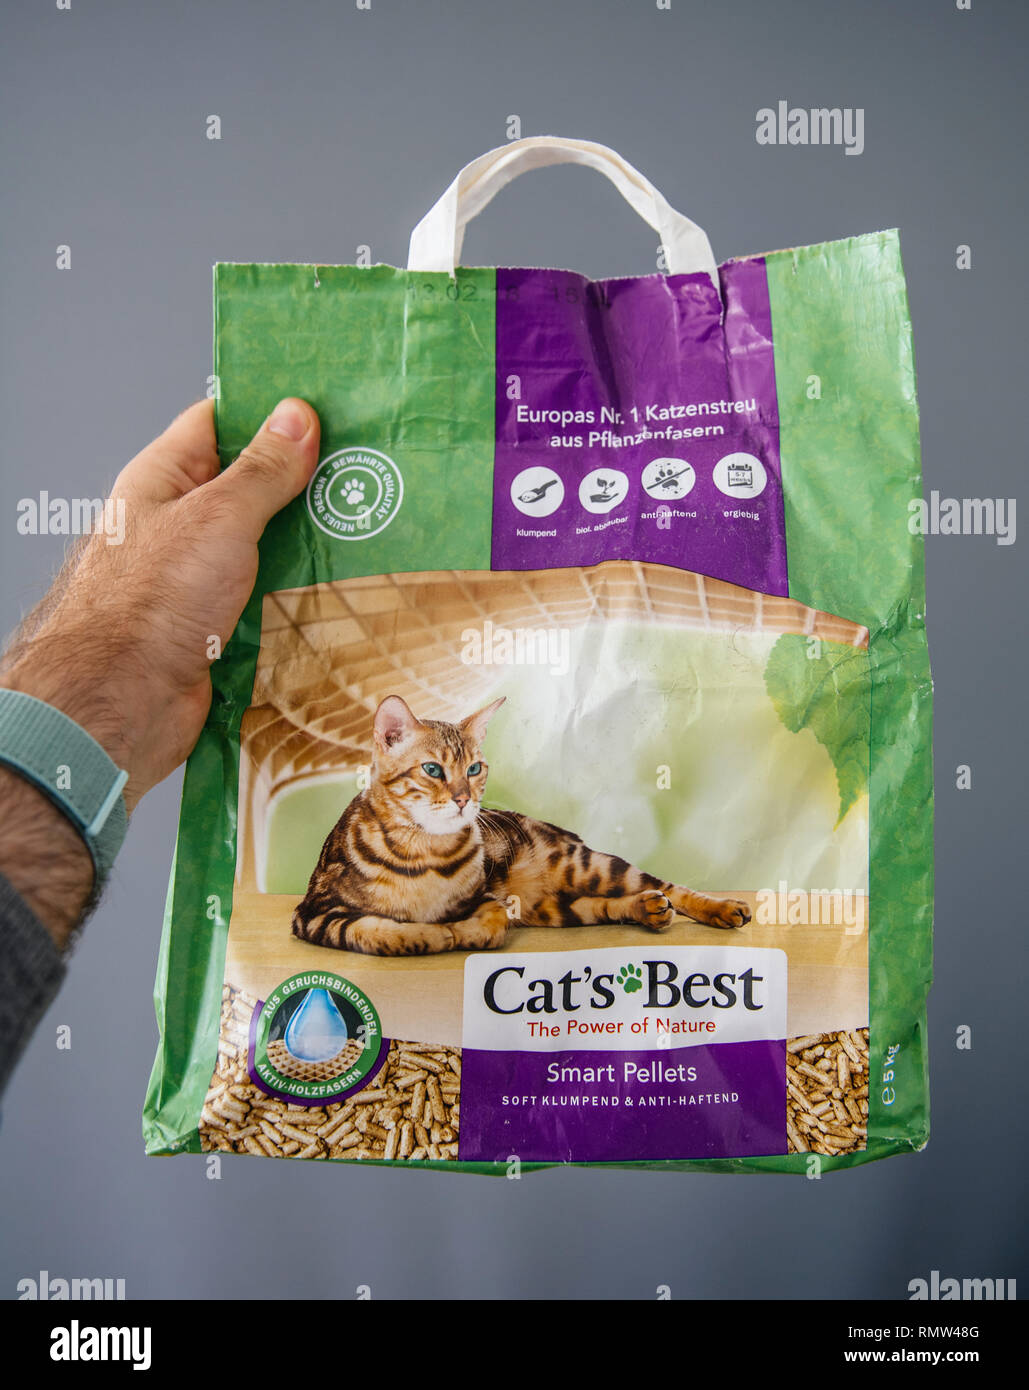 Paris France Apr 28 2018 Man Pov Hold In Hand A Package Of Cat S Best Smart Pellets For Ecological Pet Litter Stock Photo Alamy